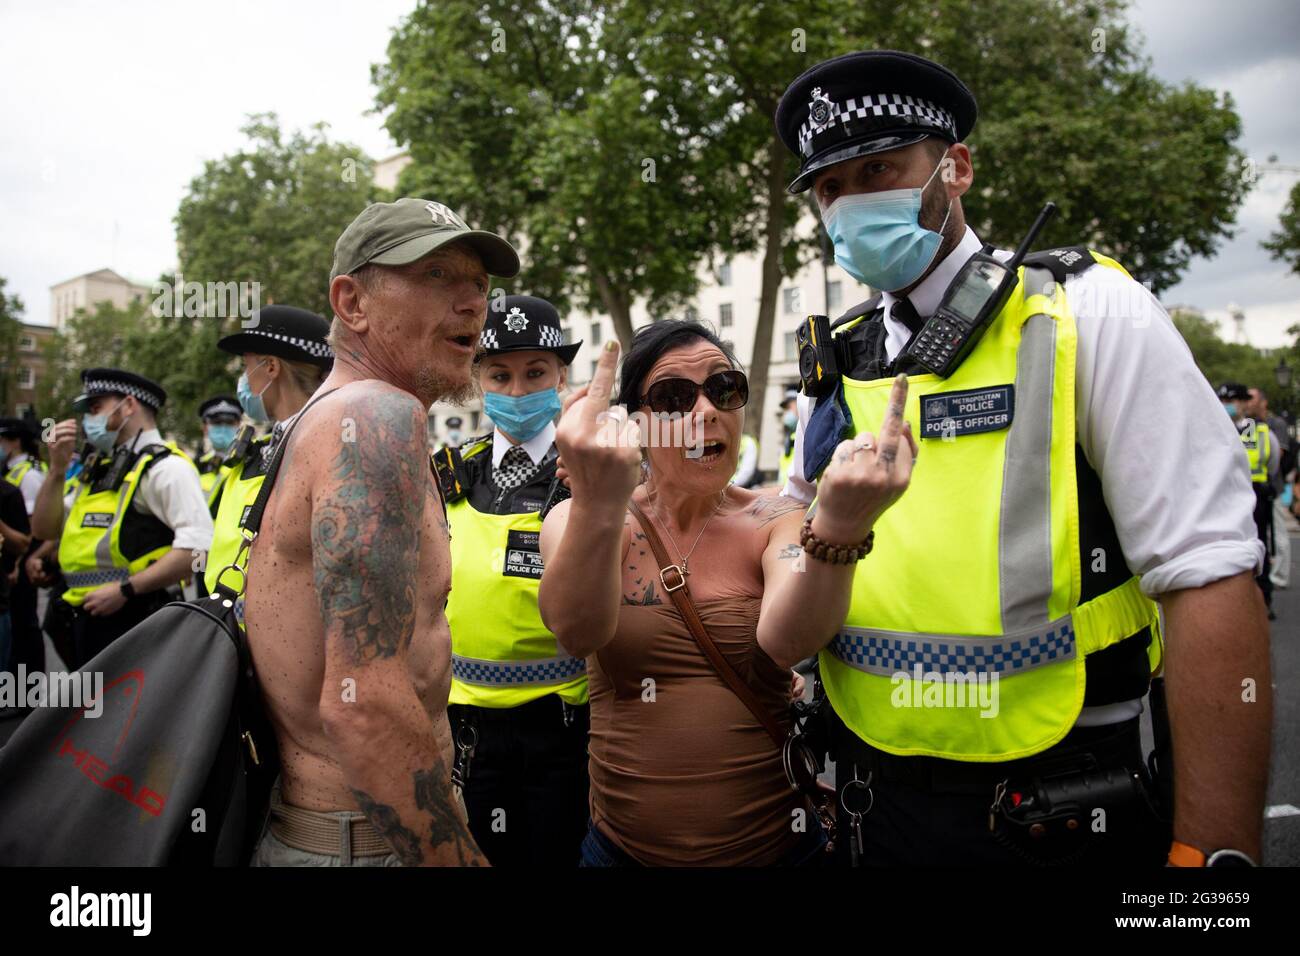 London, UK. 14th June 2021. Anti-vaxx protesters harass journalists. Yuen Ching Ng/Alamy Live News Stock Photo